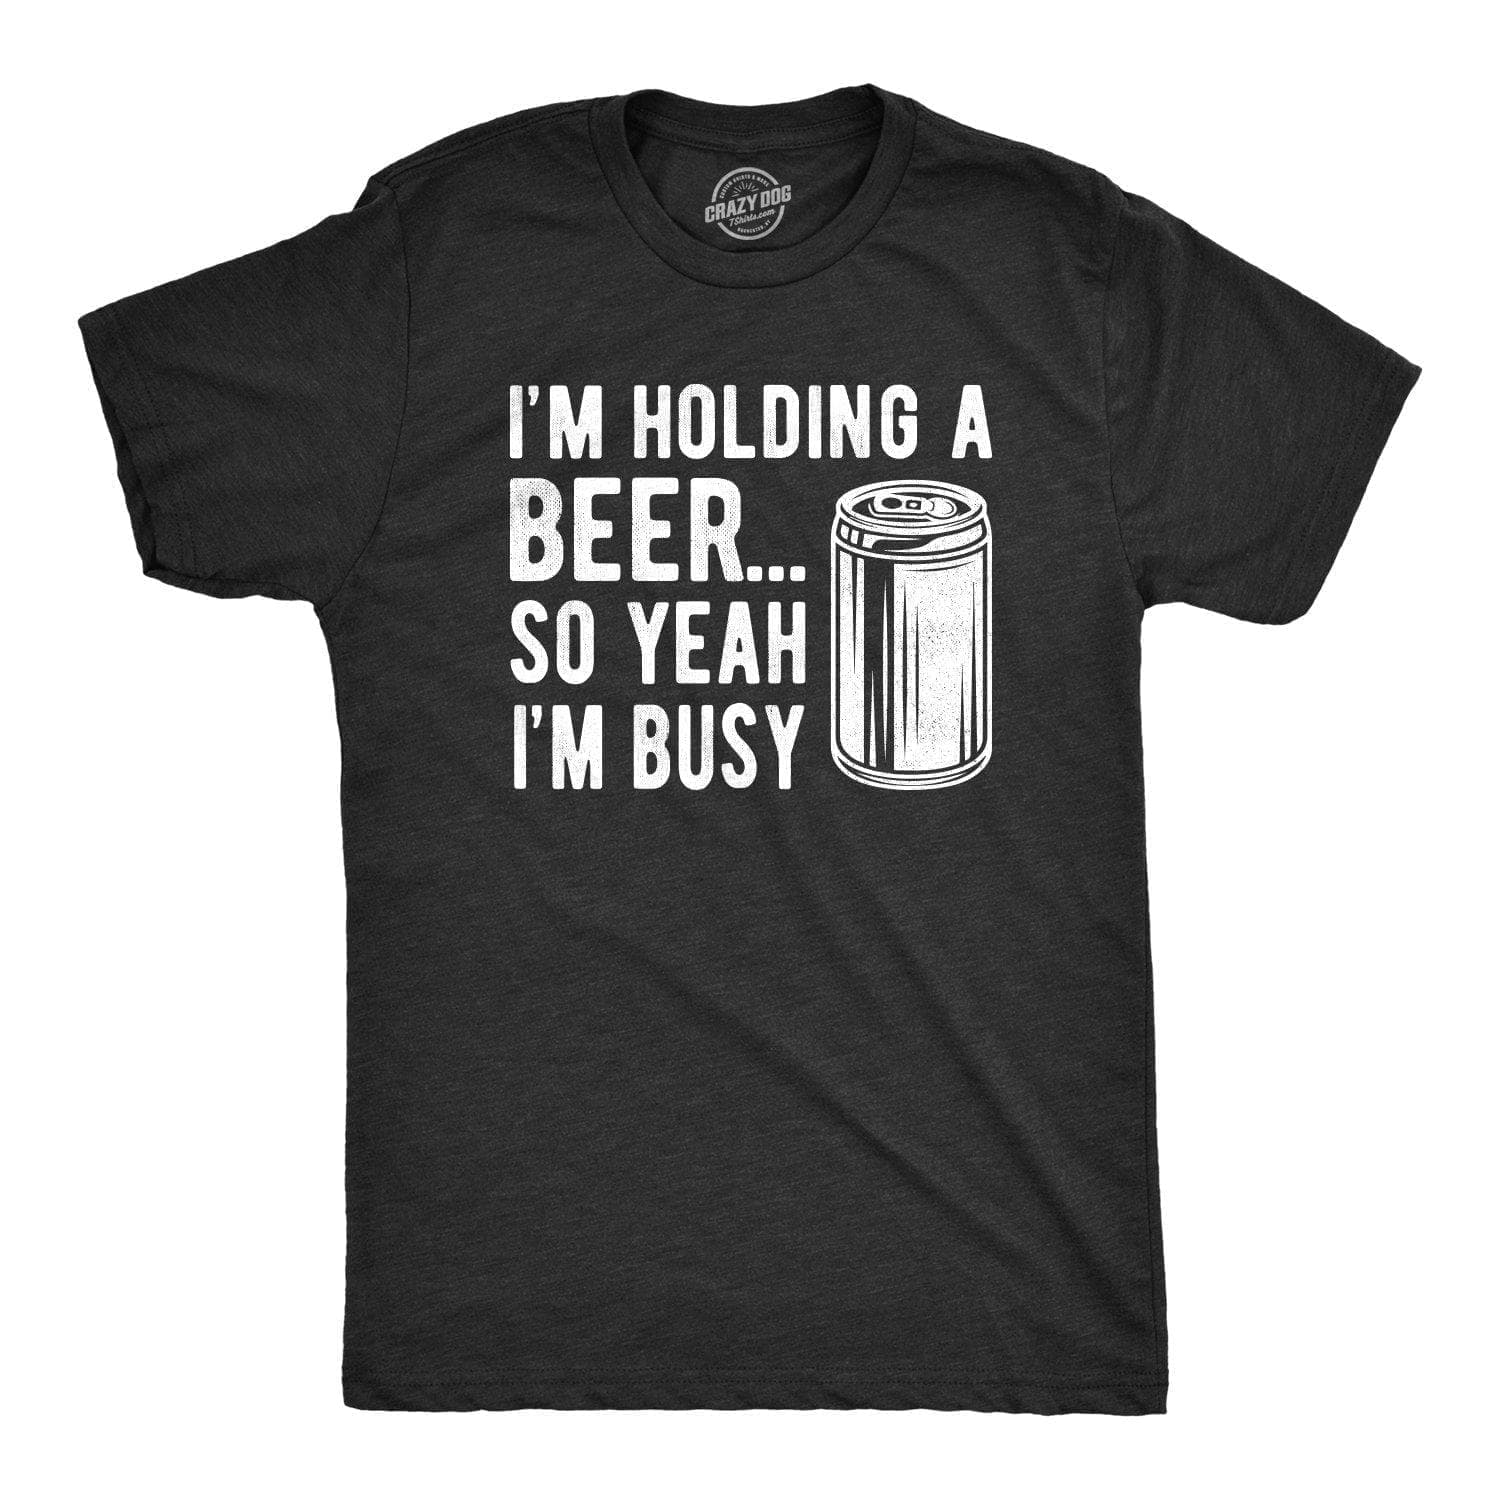 I'm Holding A Beer So Yeah I'm Busy Men's Tshirt  -  Crazy Dog T-Shirts